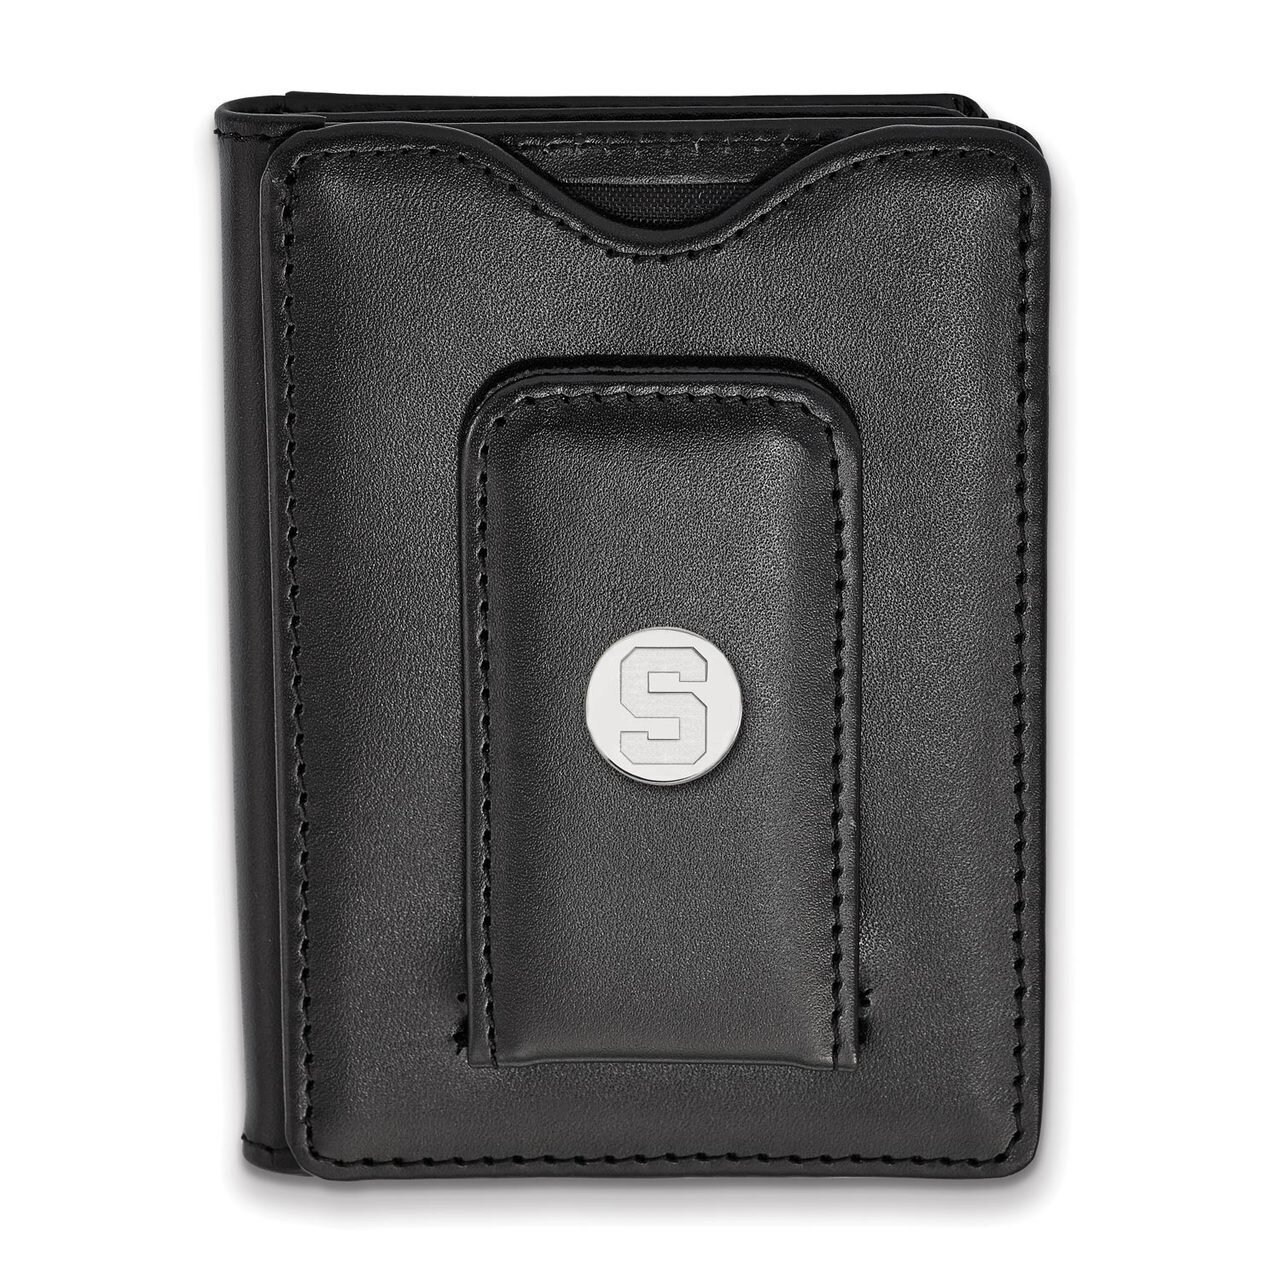 Michigan State University Black Leather Wallet SS013MIS-W1